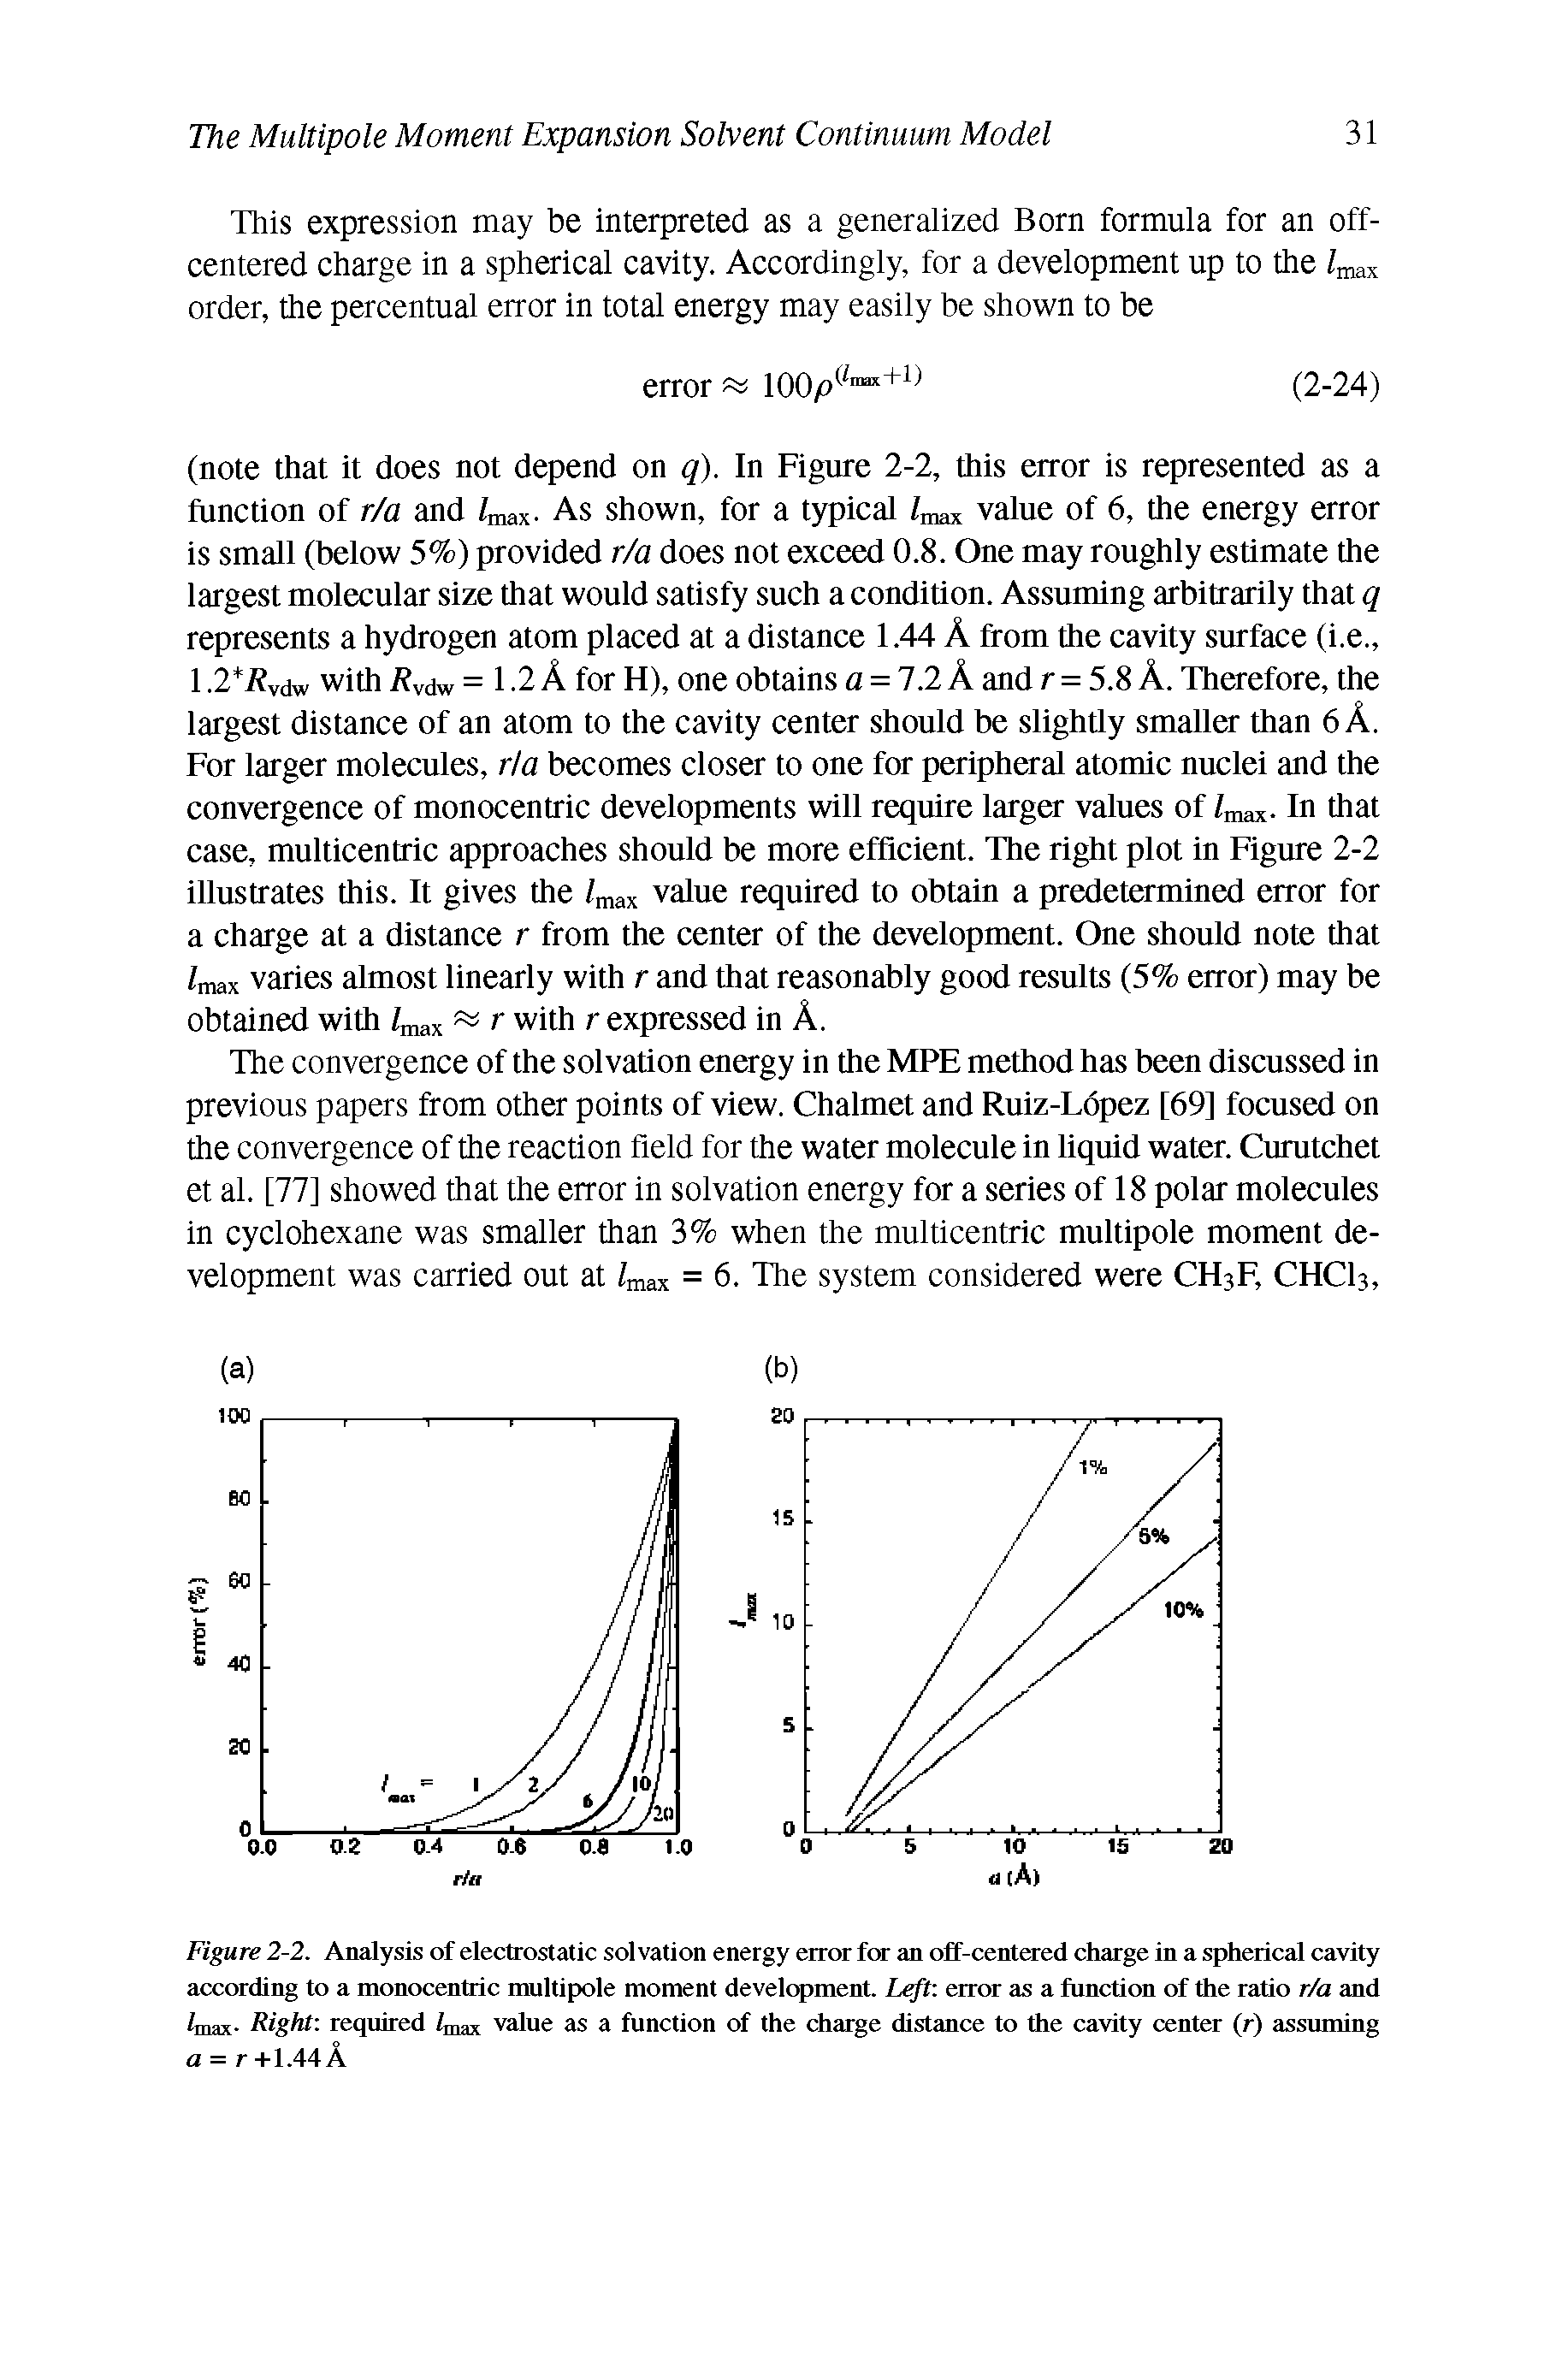 Figure 2-2. Analysis of electrostatic solvation energy error for an off-centered charge in a spherical cavity according to a monocentric multipole moment development. Left error as a function of the ratio r/a and inax- Right required /mM value as a function of the charge distance to the cavity center (r) assuming a = r +1.44 A...